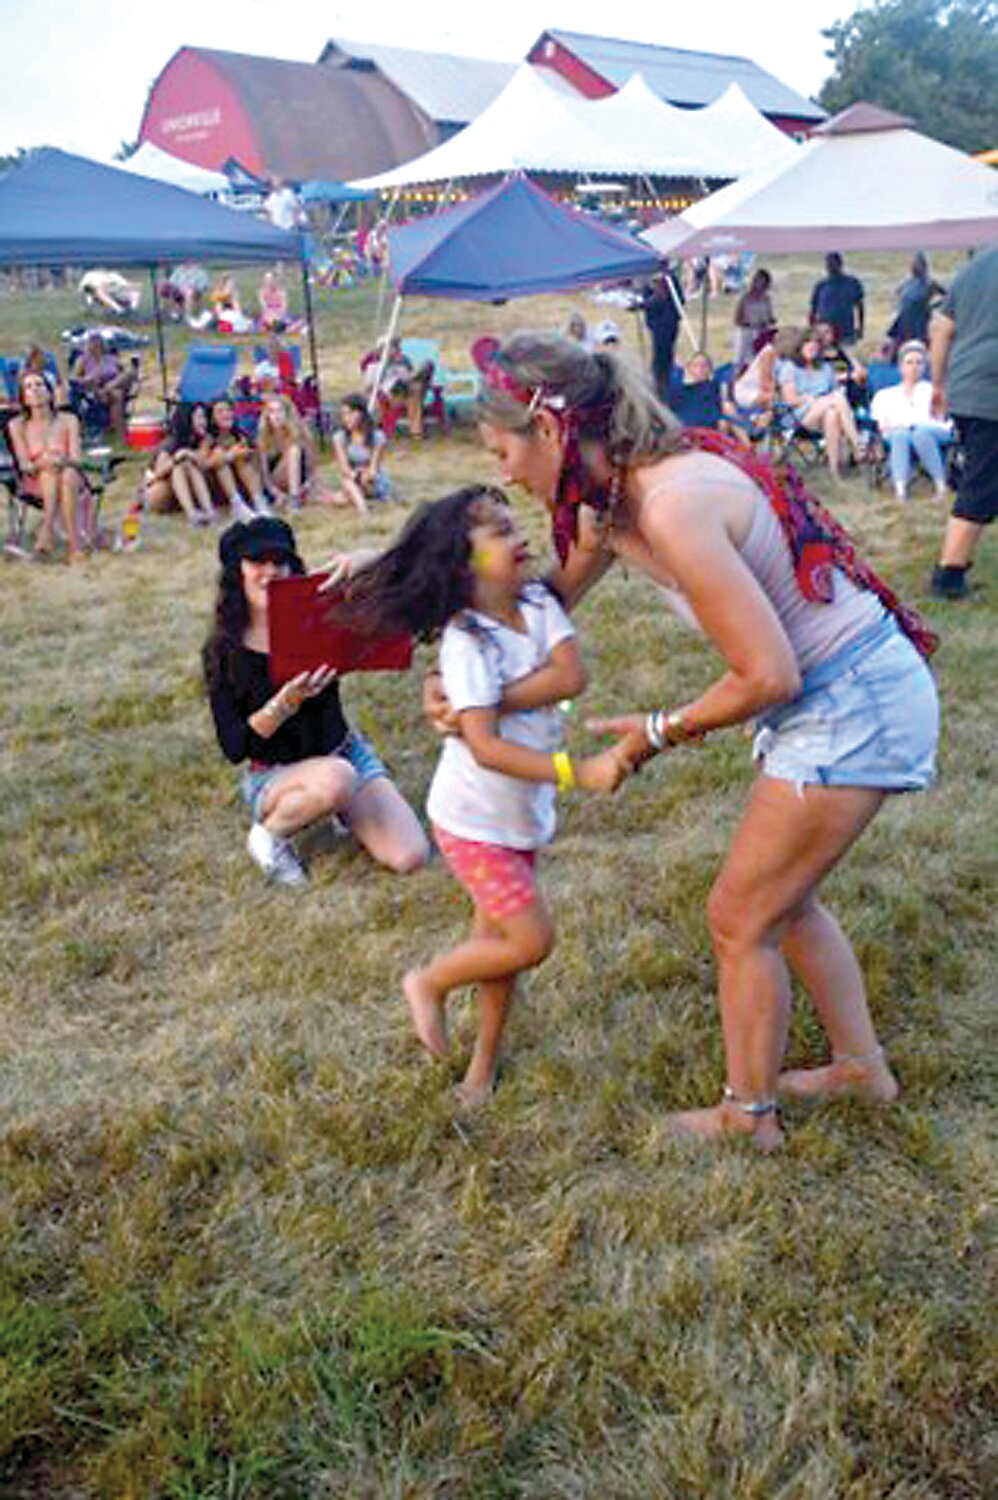 Dancing is always a part of the Sourland Mountain Fest.